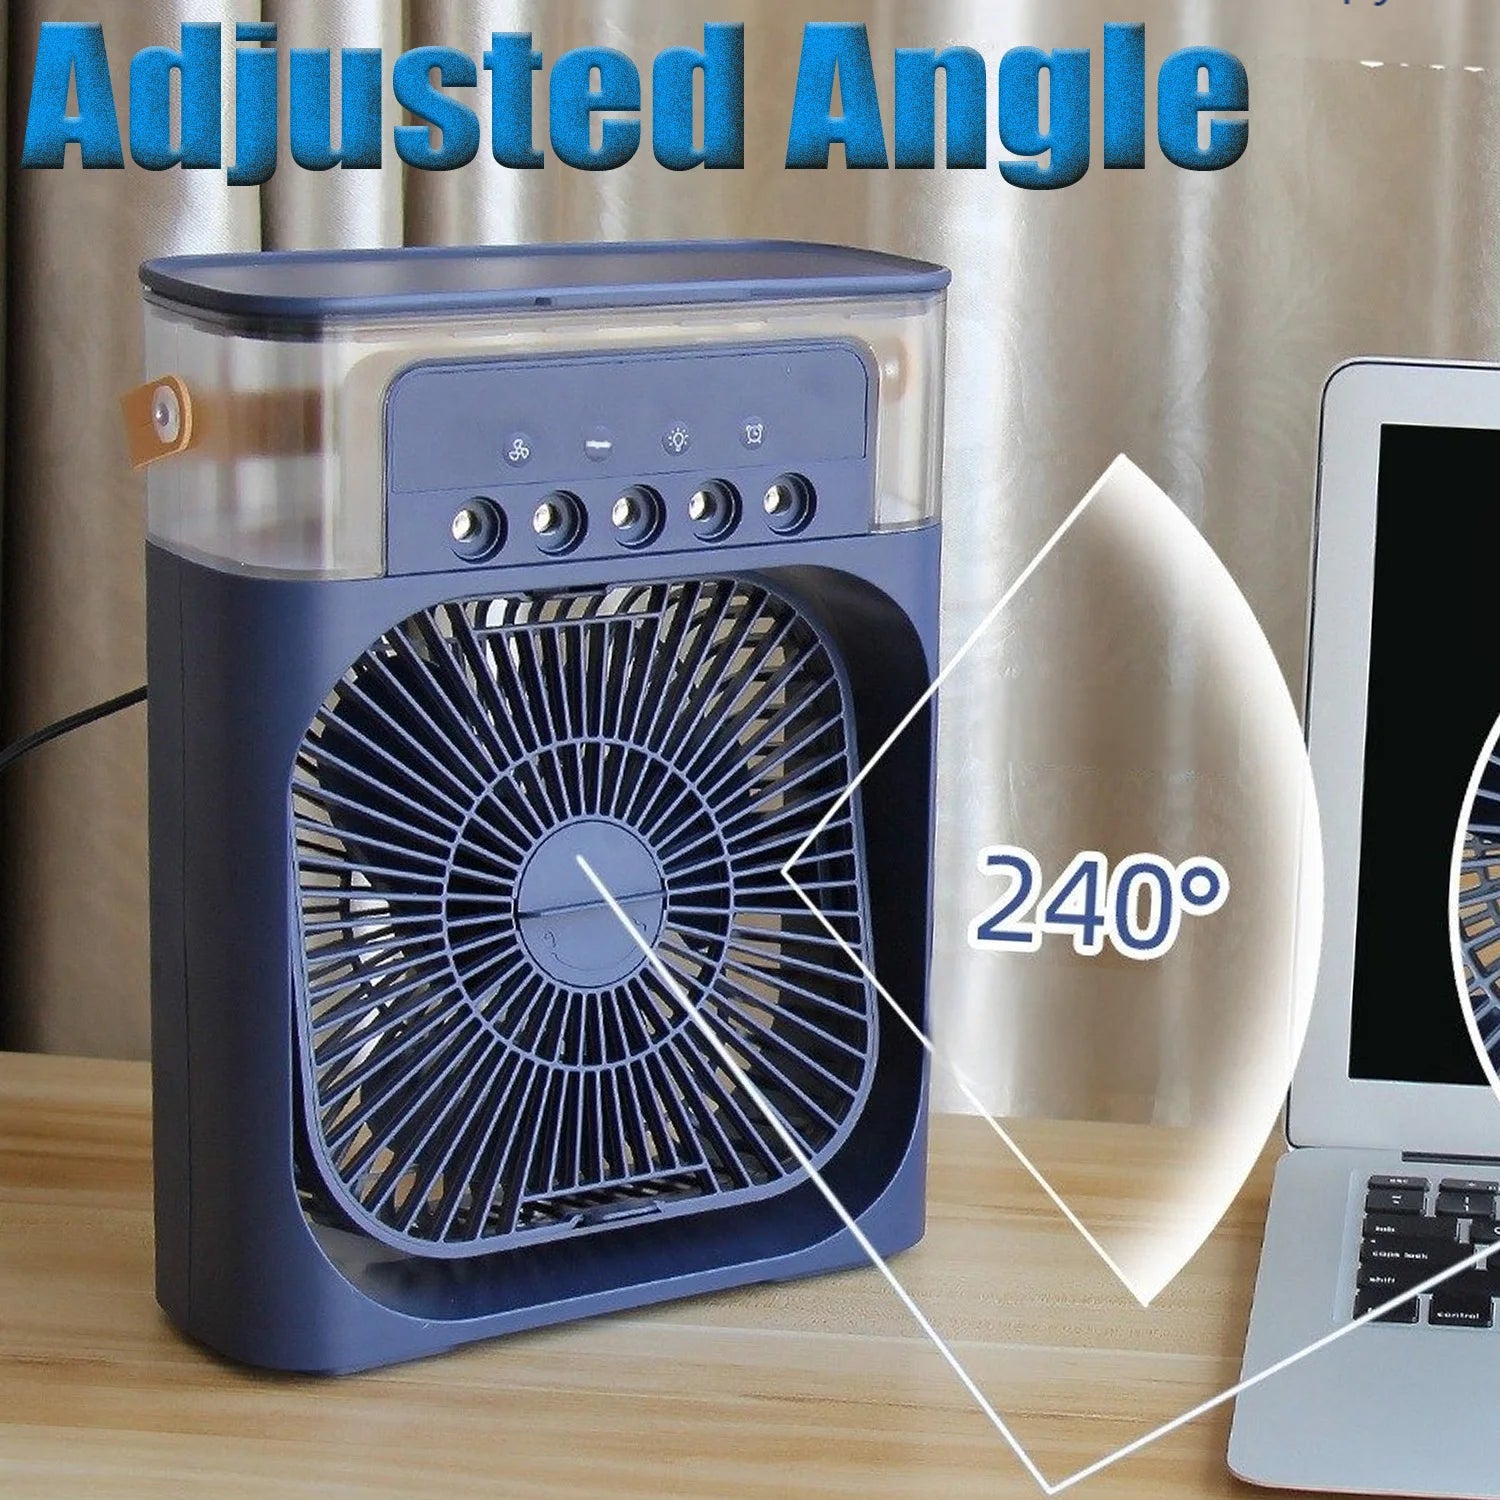 Electric Fan,Portable USB Mini Air Conditioner Timing 3 Speeds Setting,Cooler Wind Spray Wide Angled Adjust with 600ml Capacity